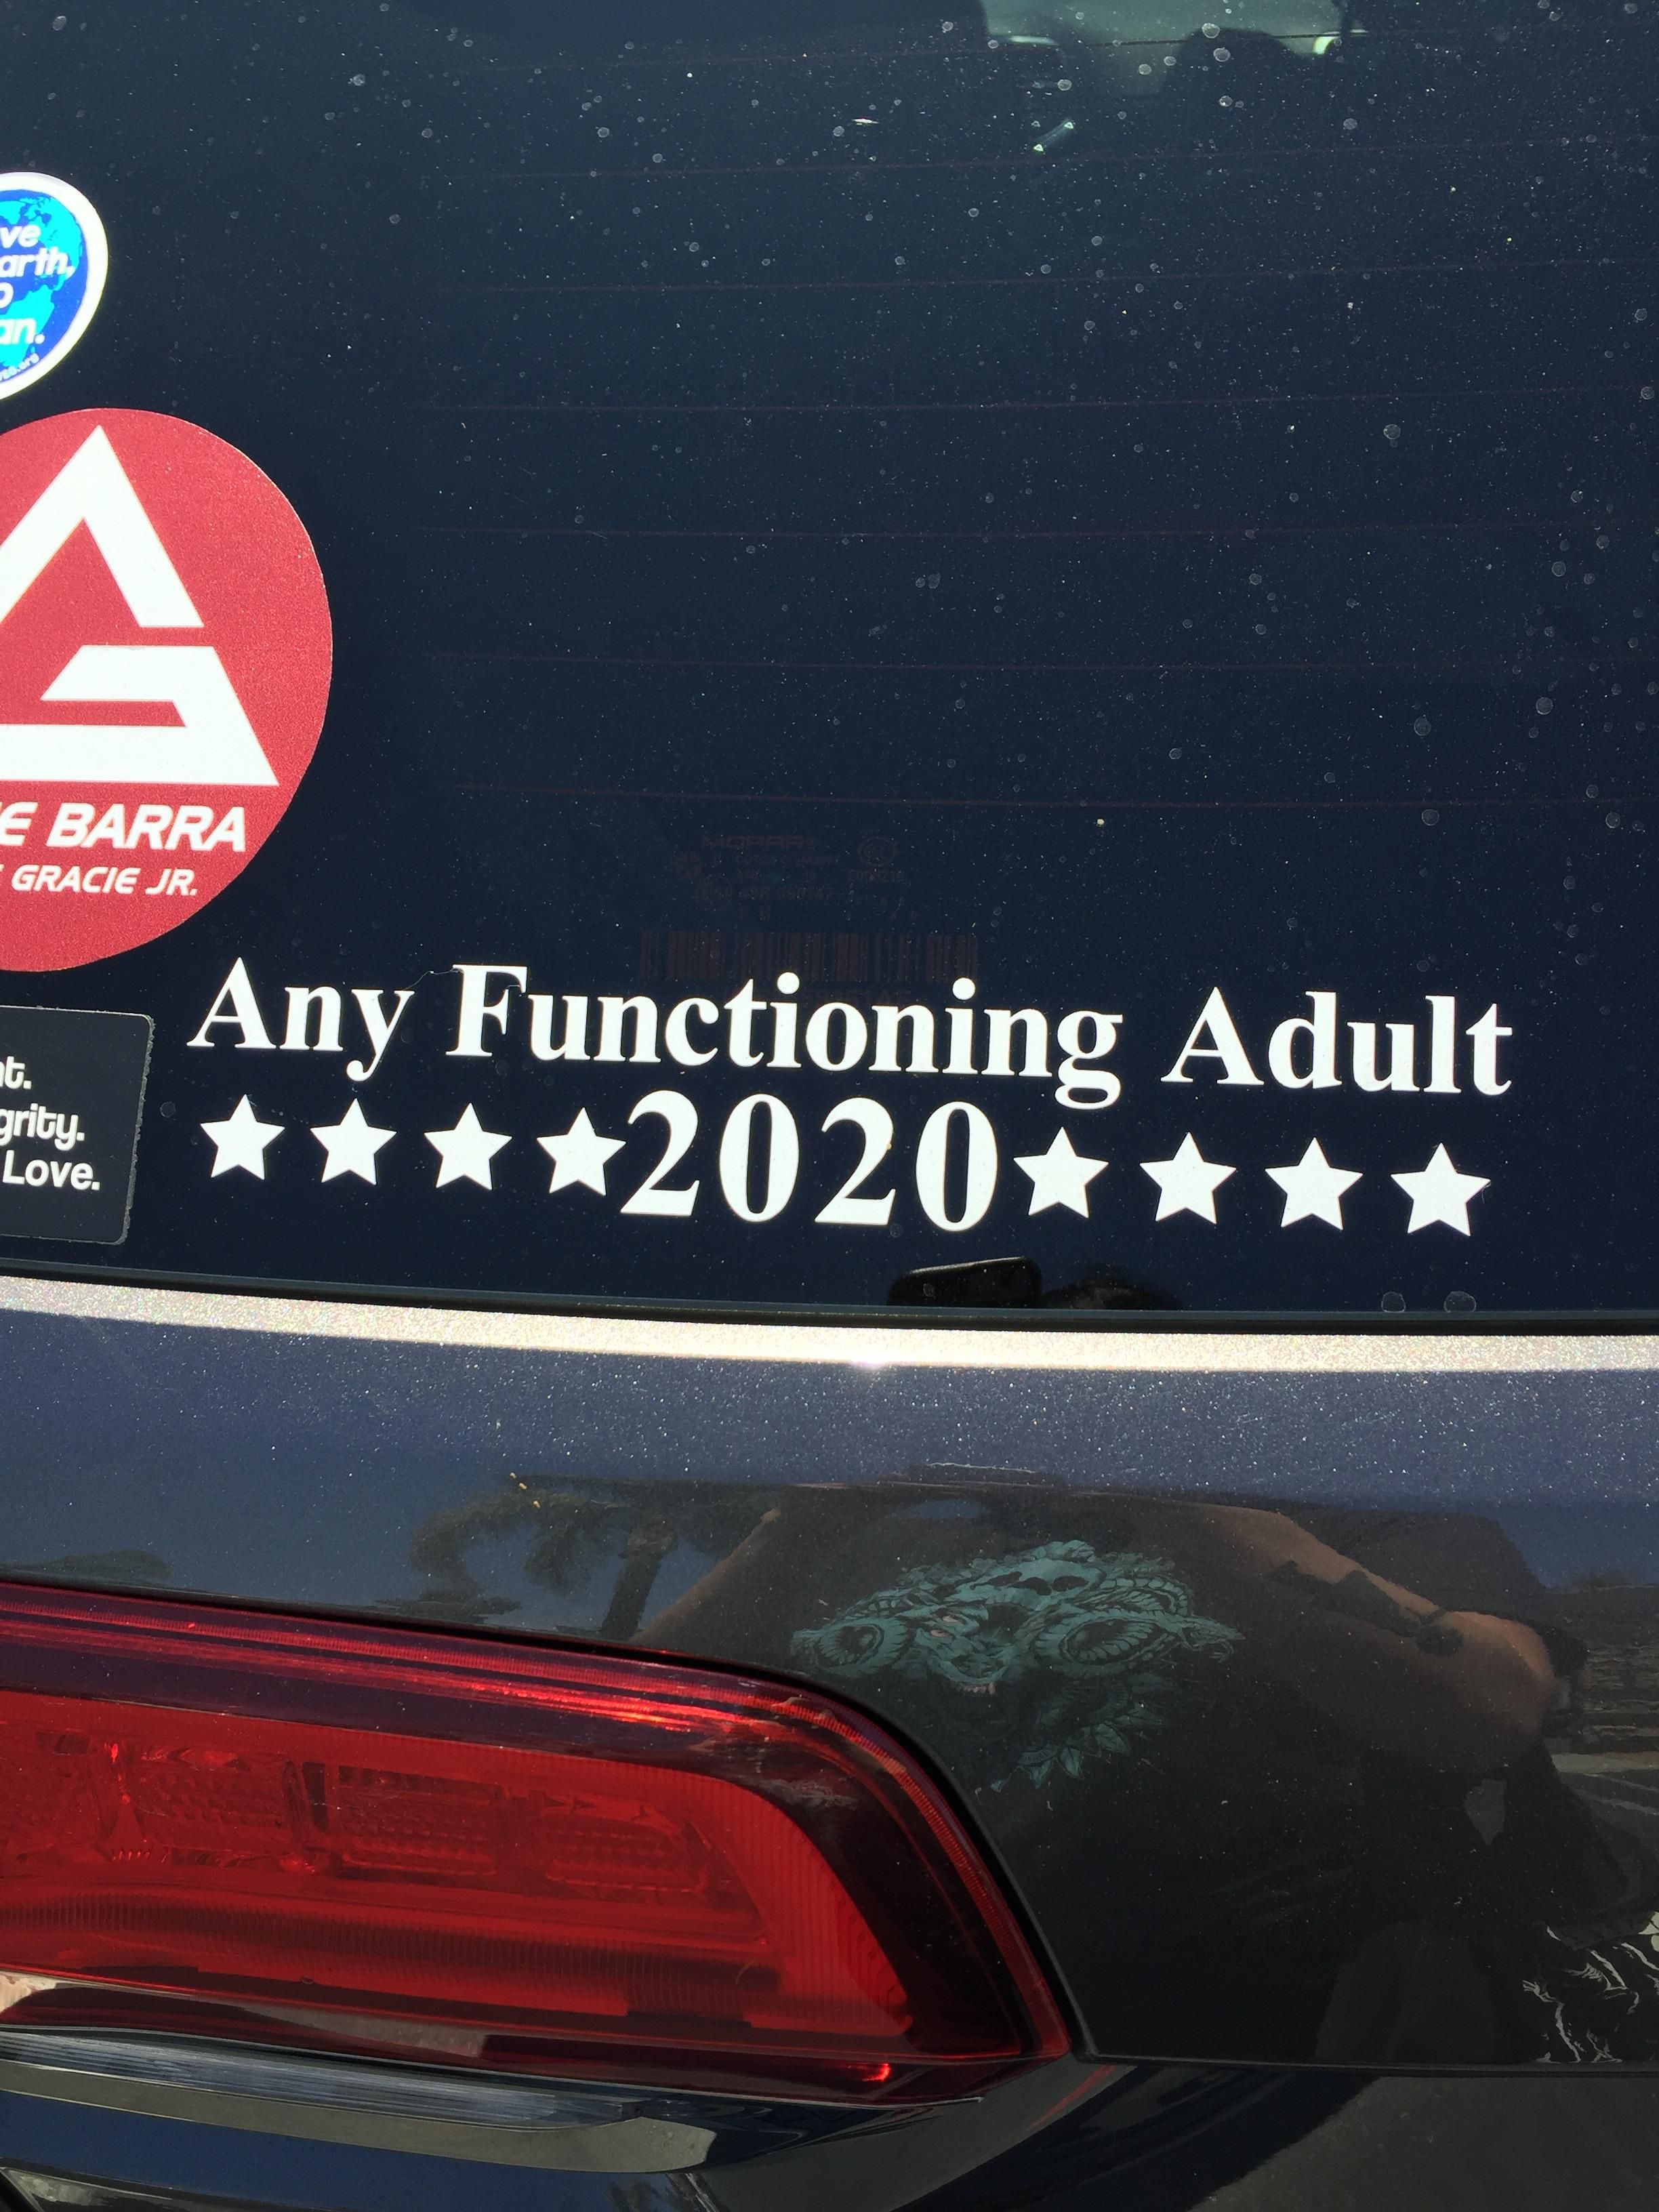 Found this bumper sticker in the Ikea parking lot.